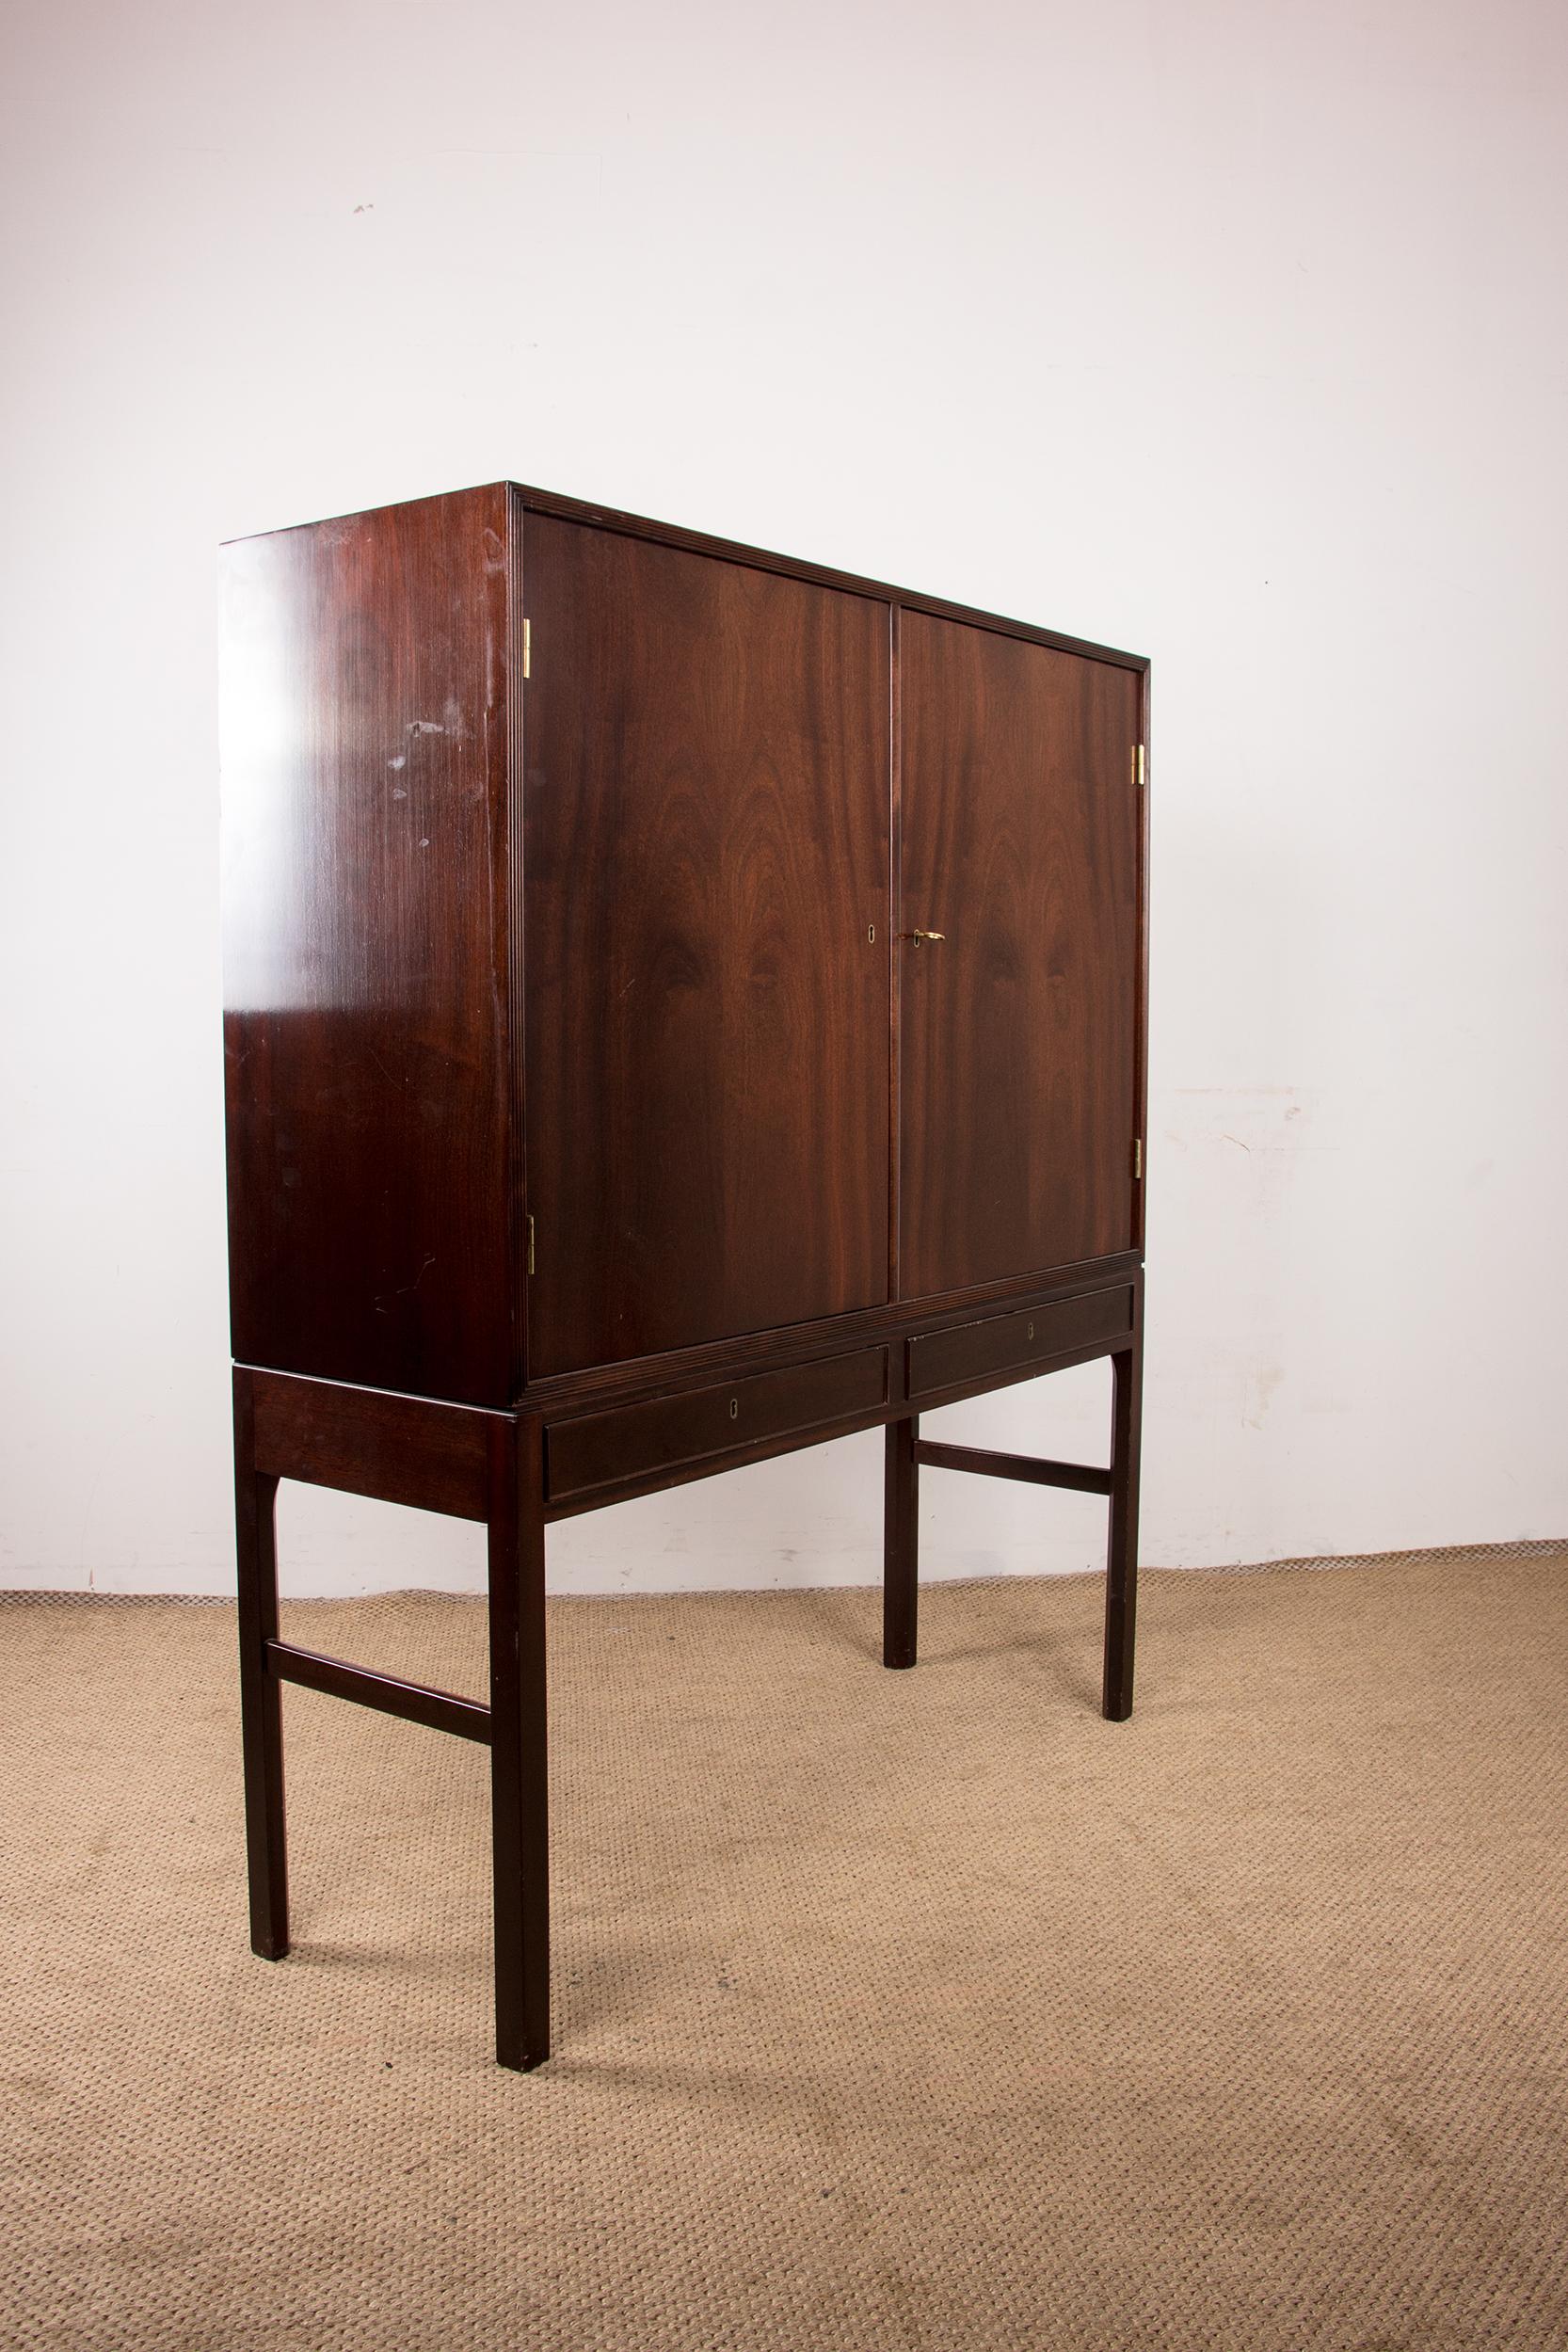 High Danish Cabinet in Mahogany and Brass by Ole Wanscher for Poul Jeppesen 1960 For Sale 10